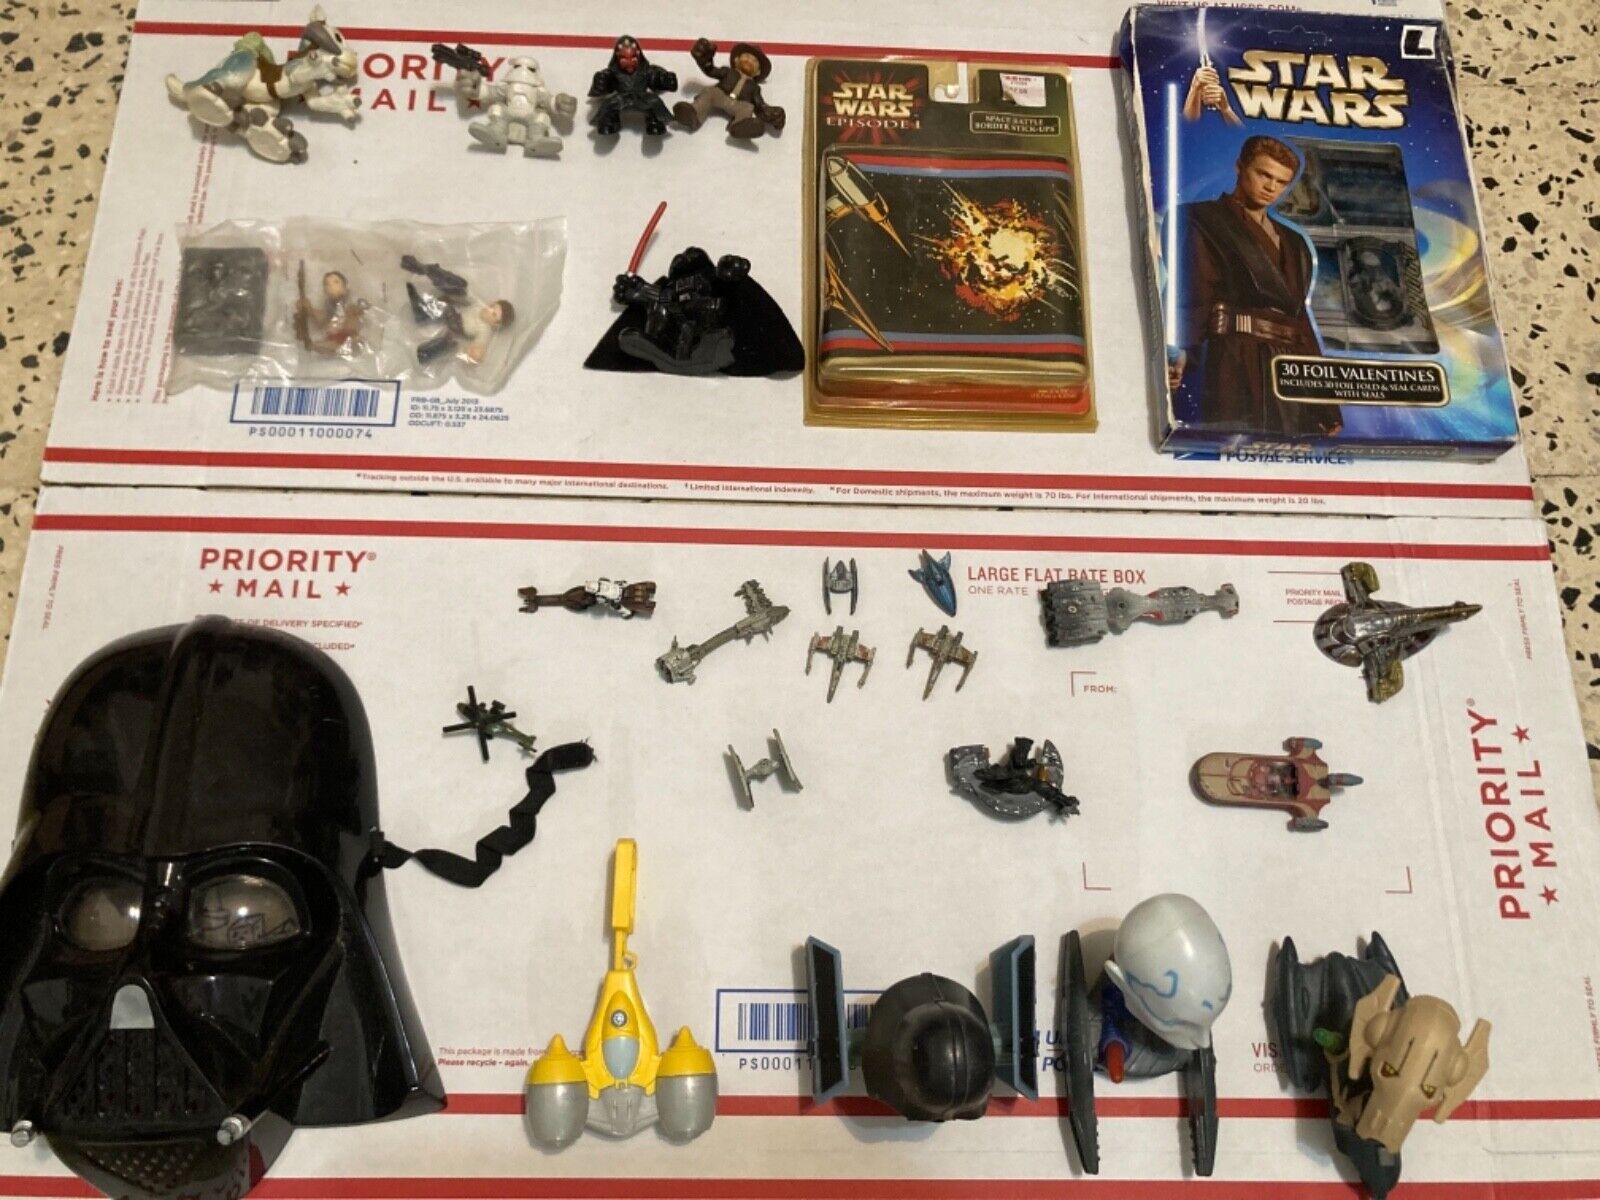 27 LOT ( STAR WARS ) FIGURE, METAL VEHICLES, PROMO AND MORE ) SEE IT